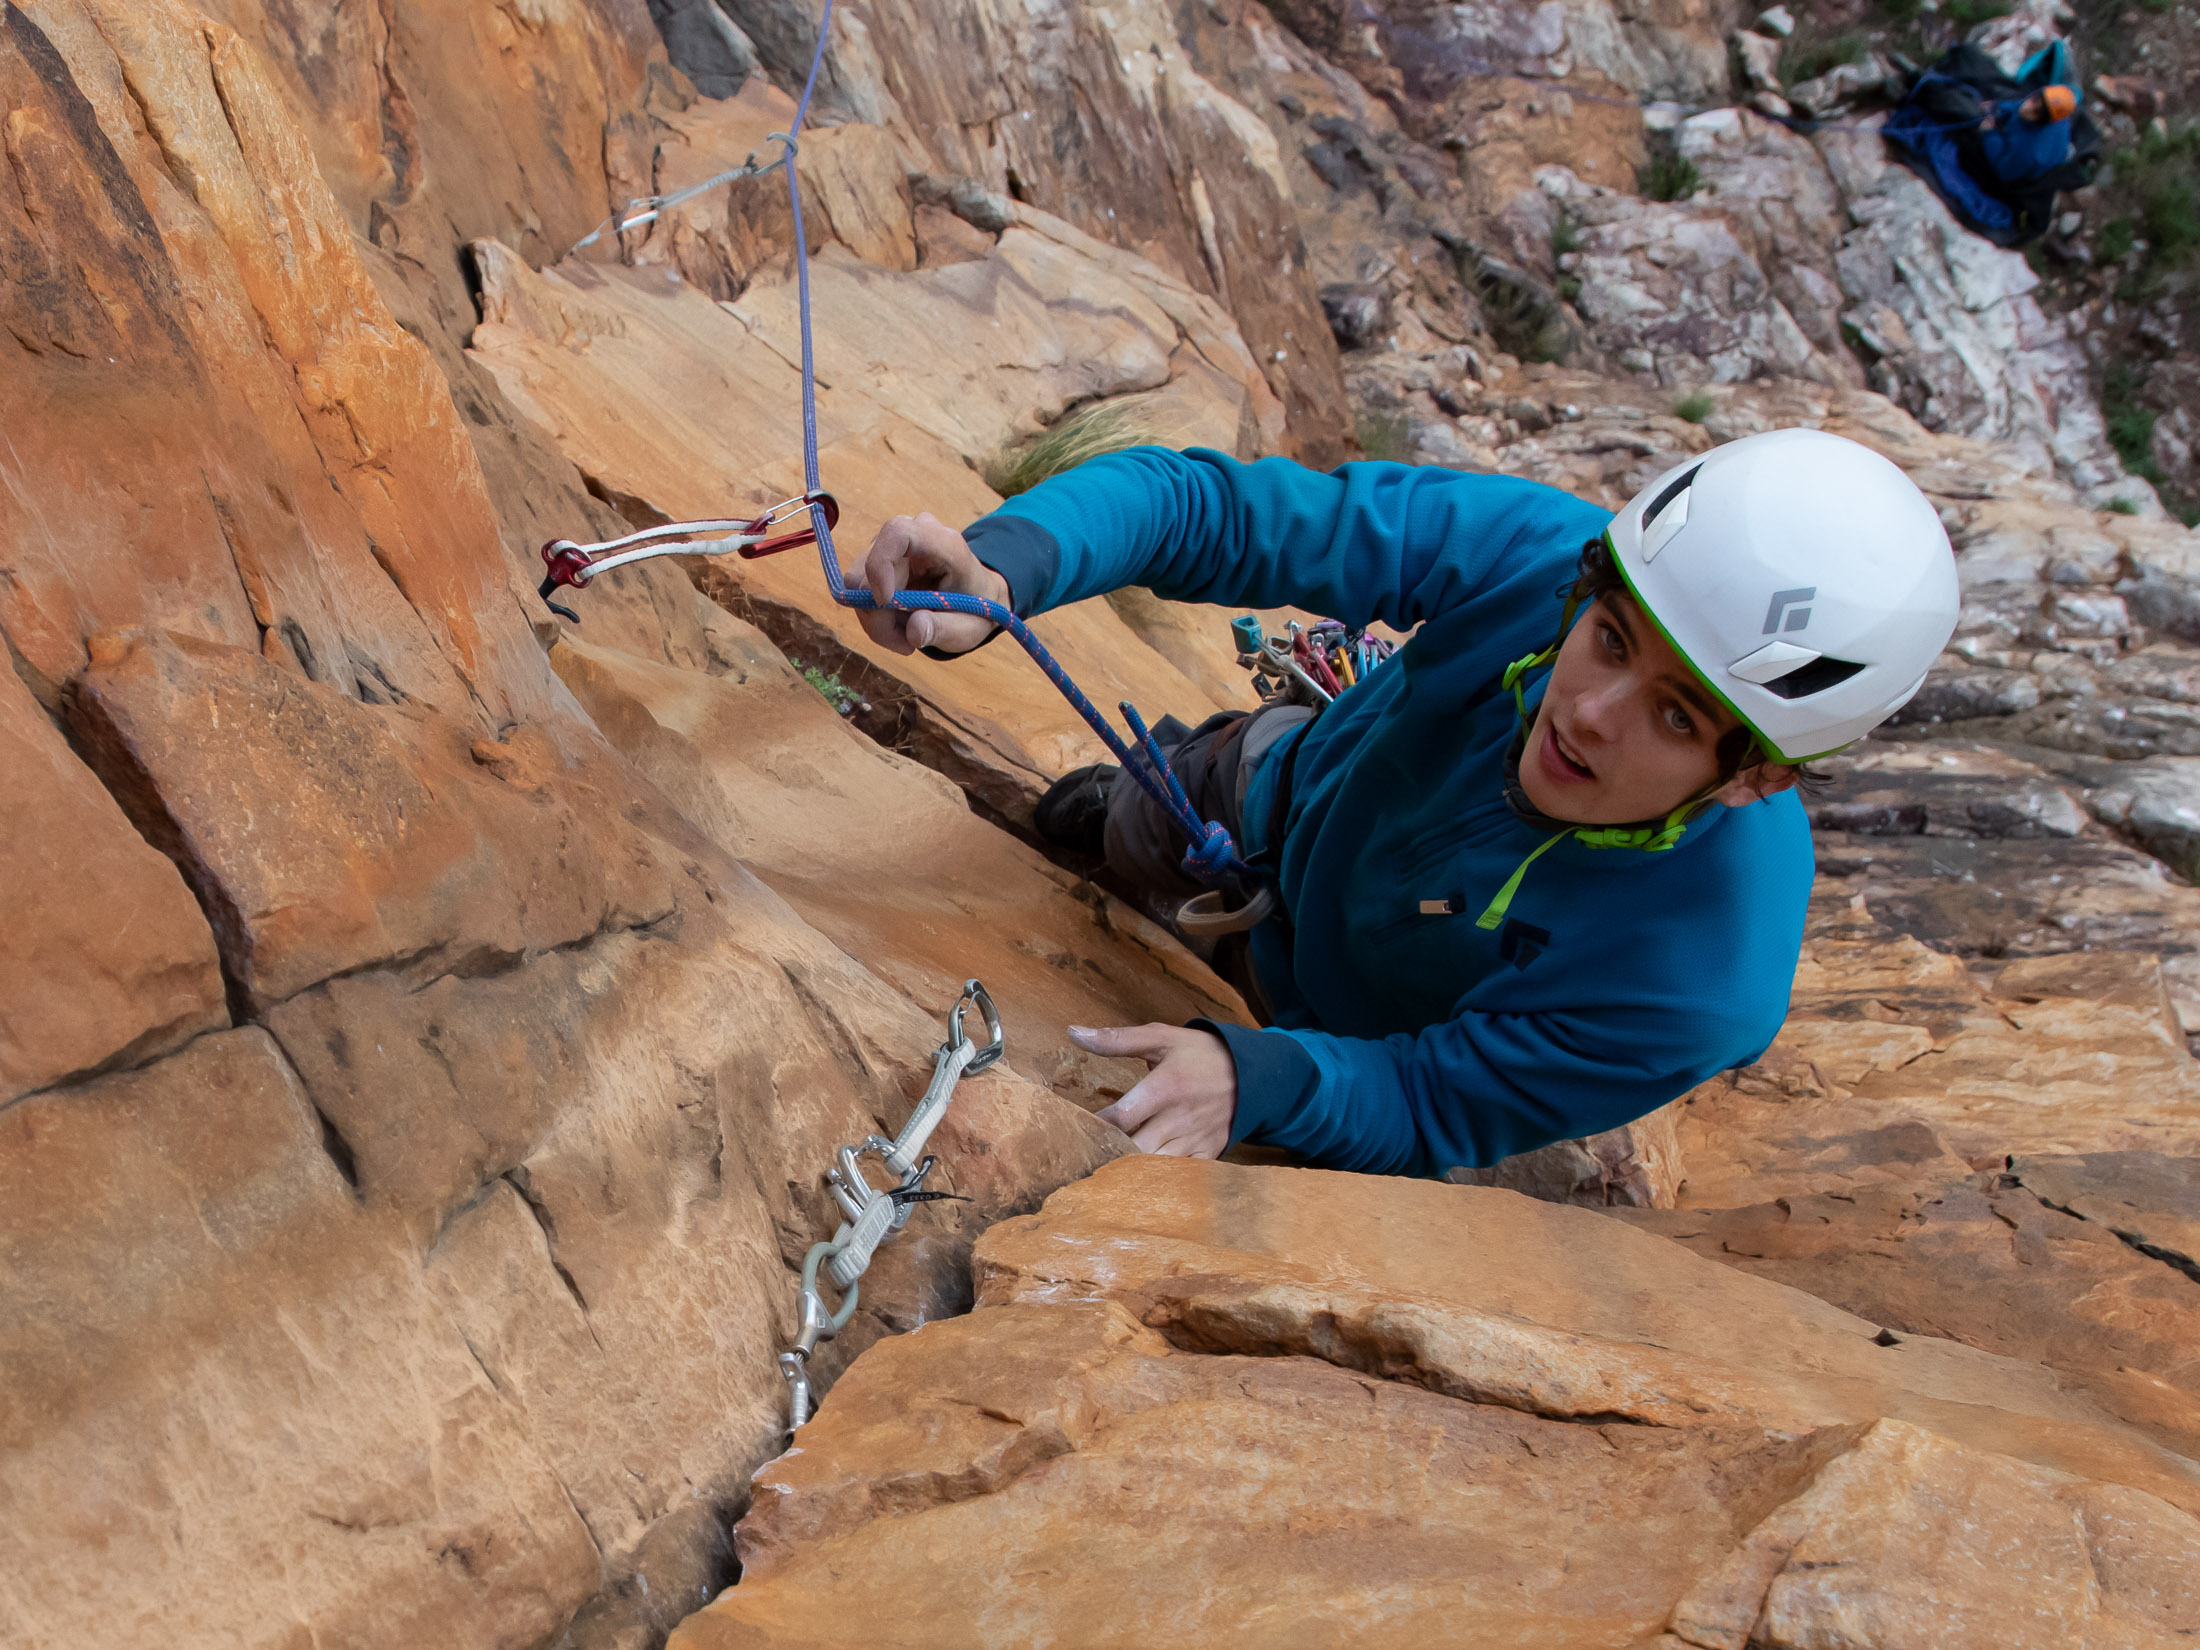 Climber clipping trad gear on route